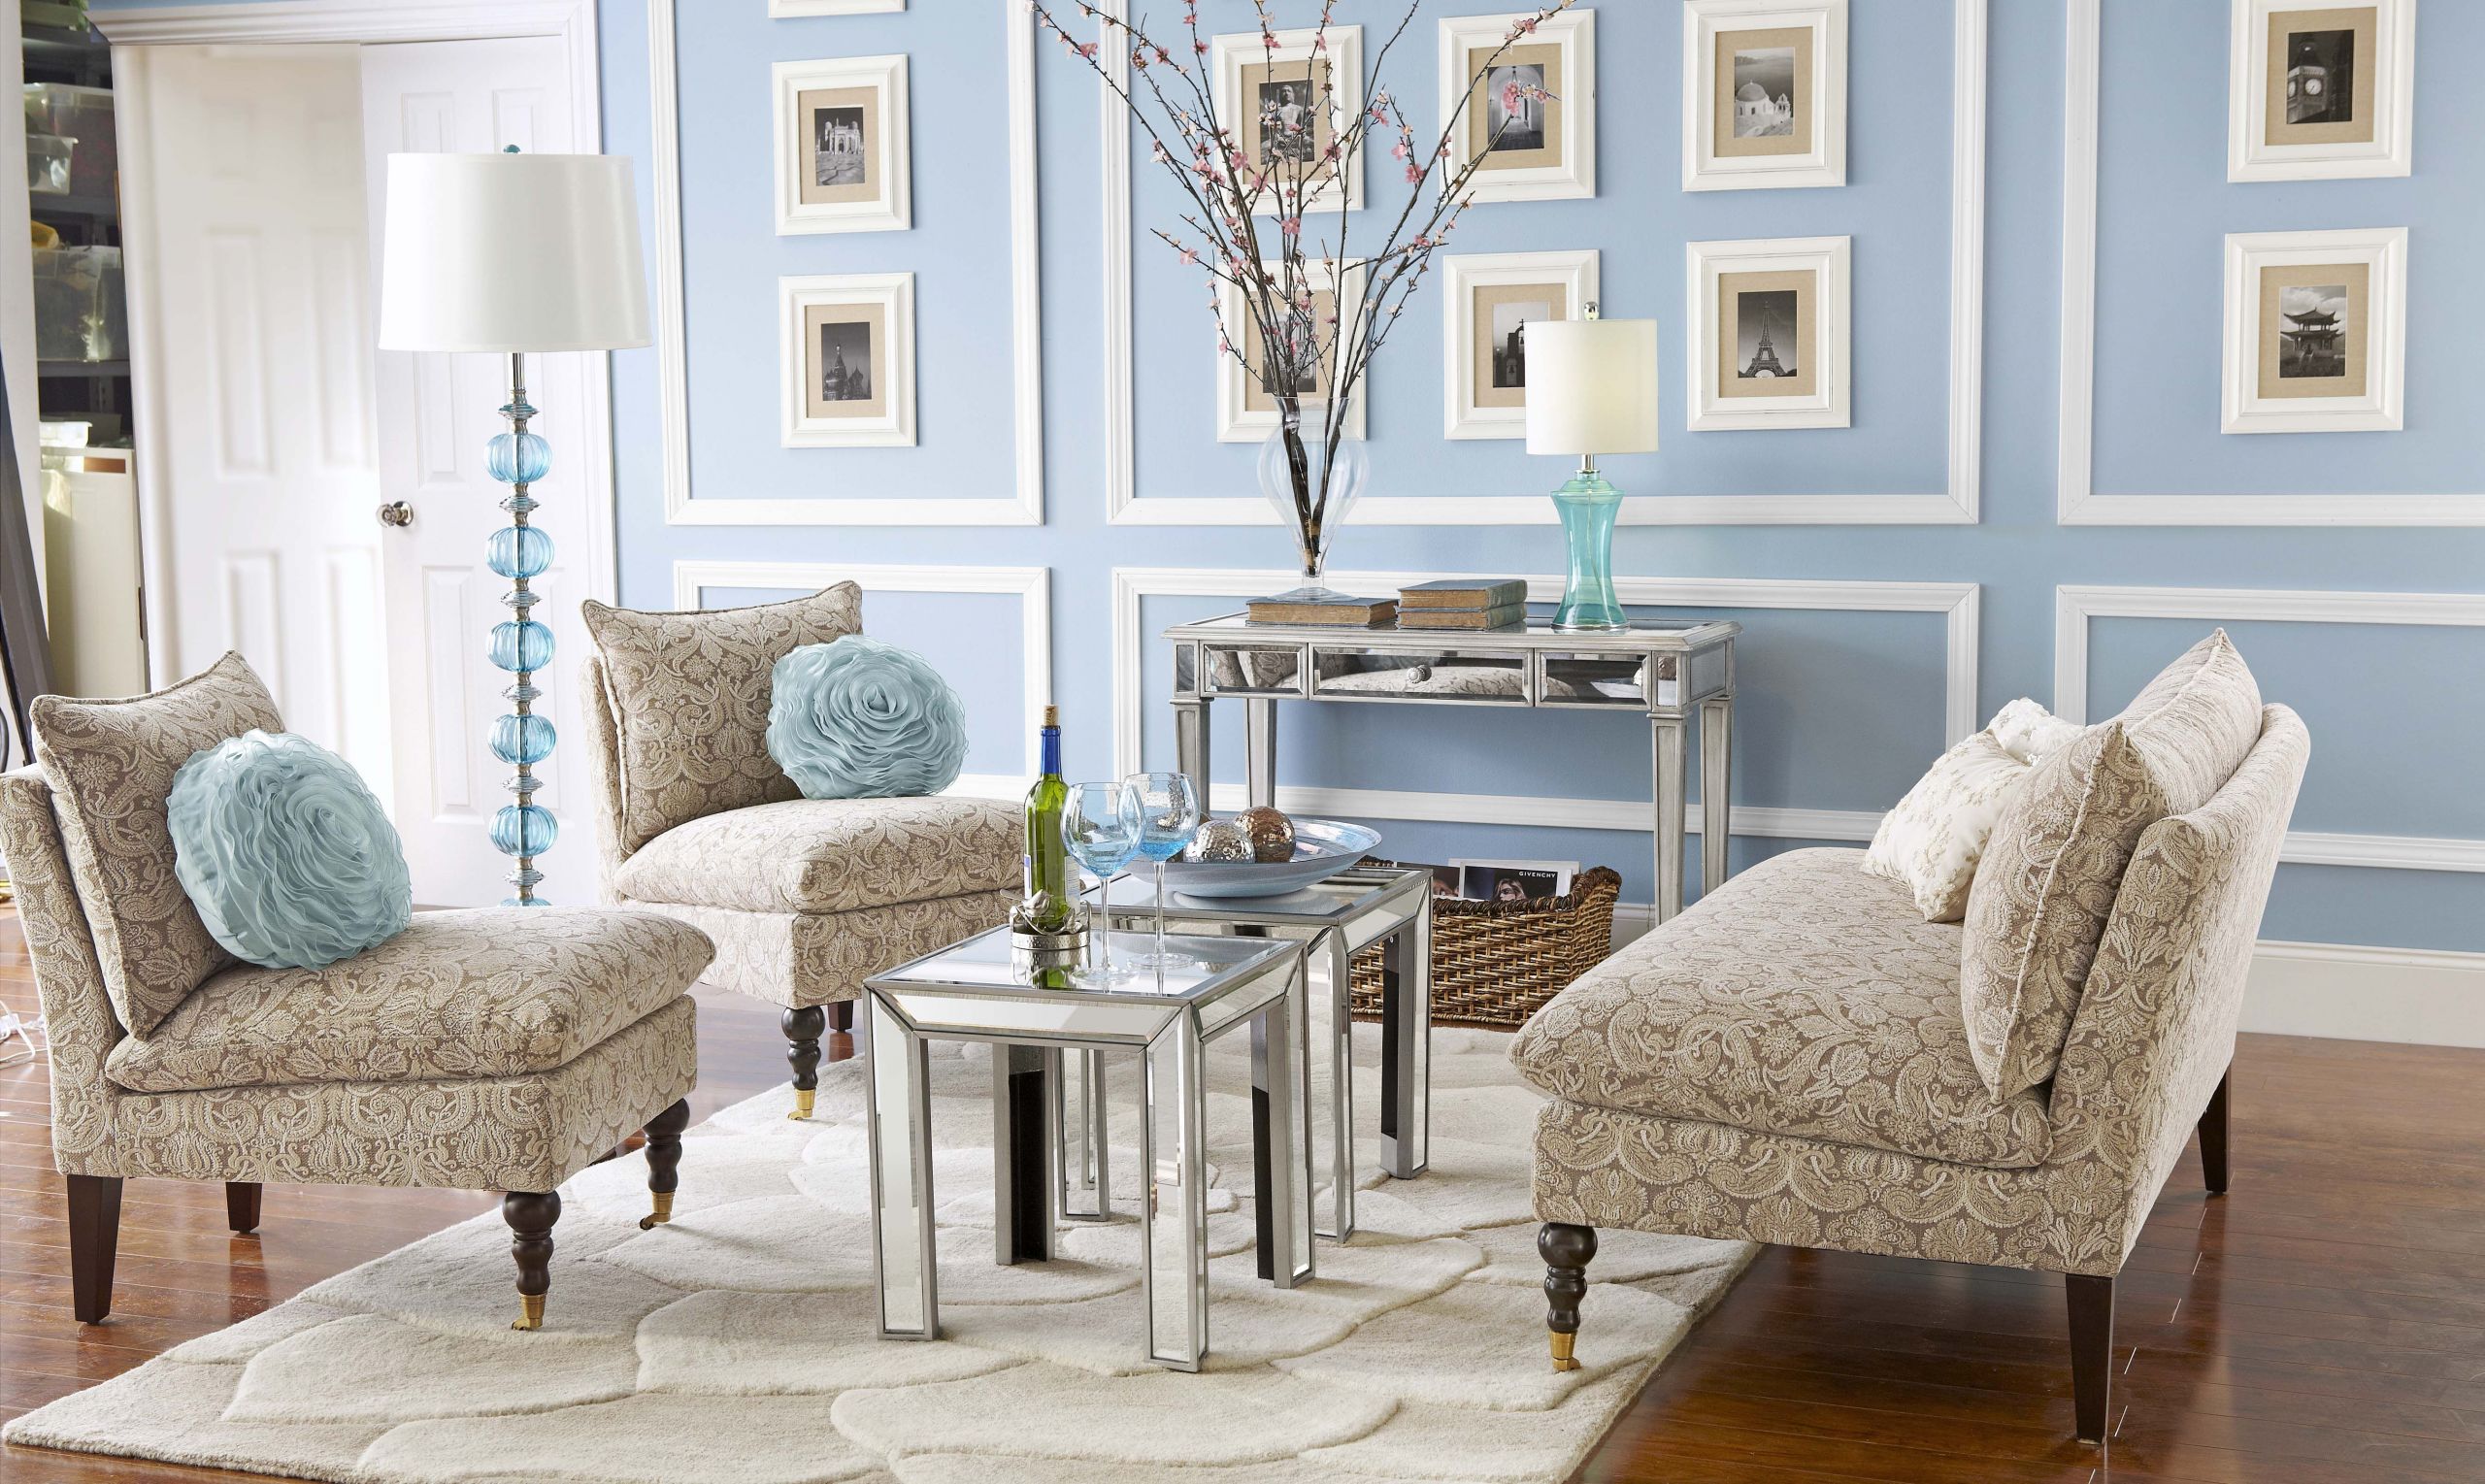 Pier One Living Room Chairs
 Living Room Chairs Pier 1 – Modern House